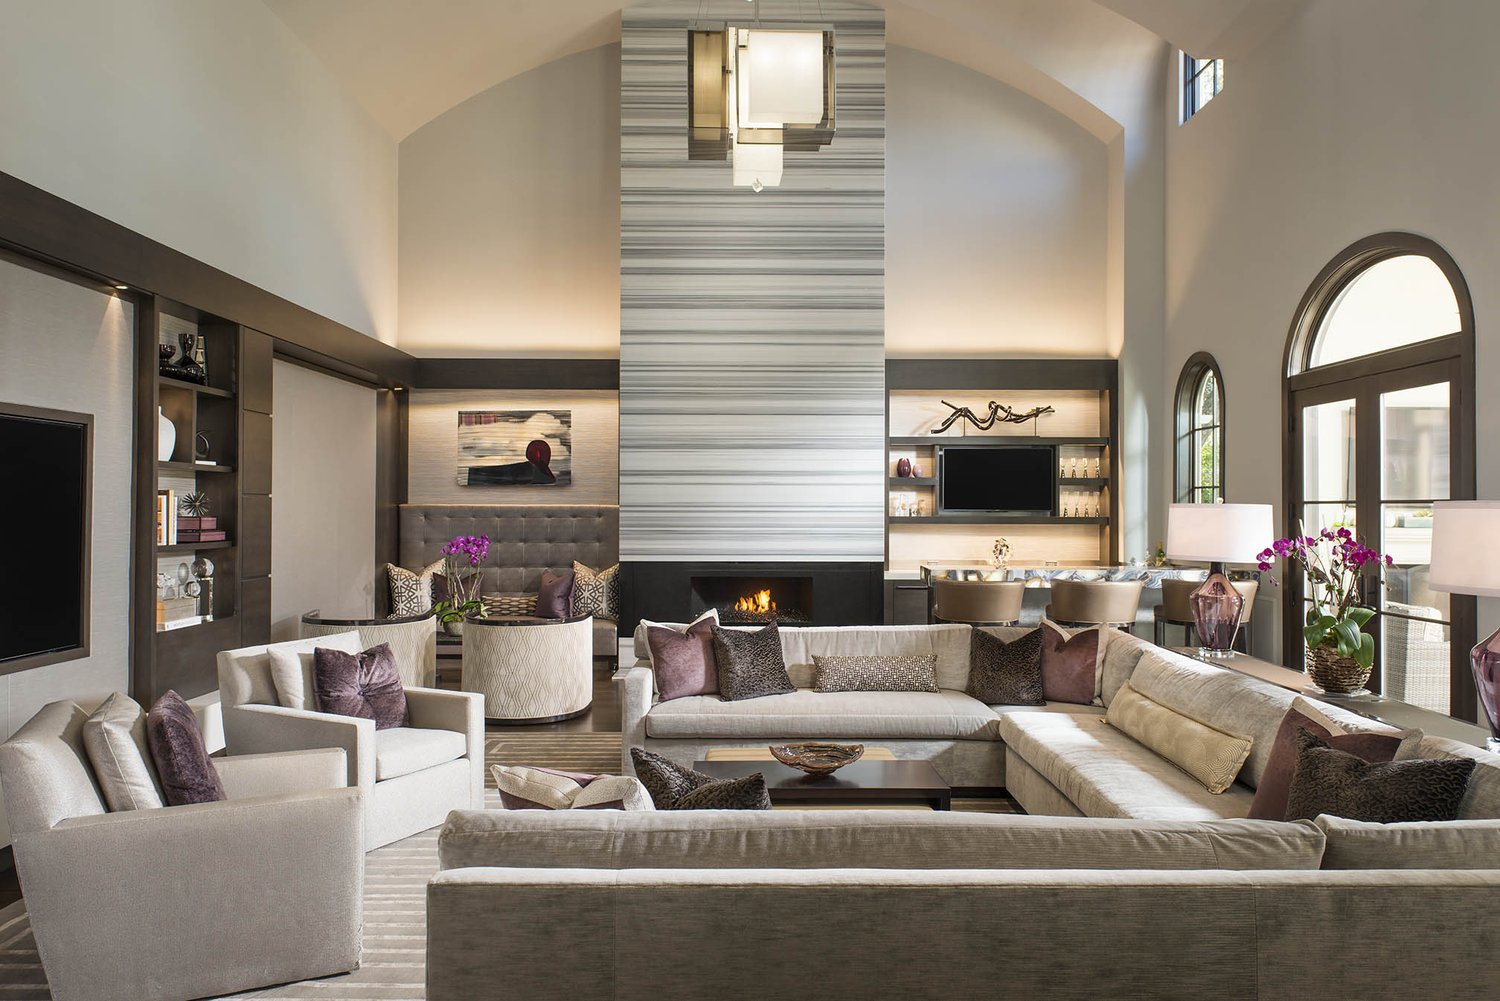 Dallas Design Group Interiors: Bringing Thoughtful & Luxurious Living To Your Home